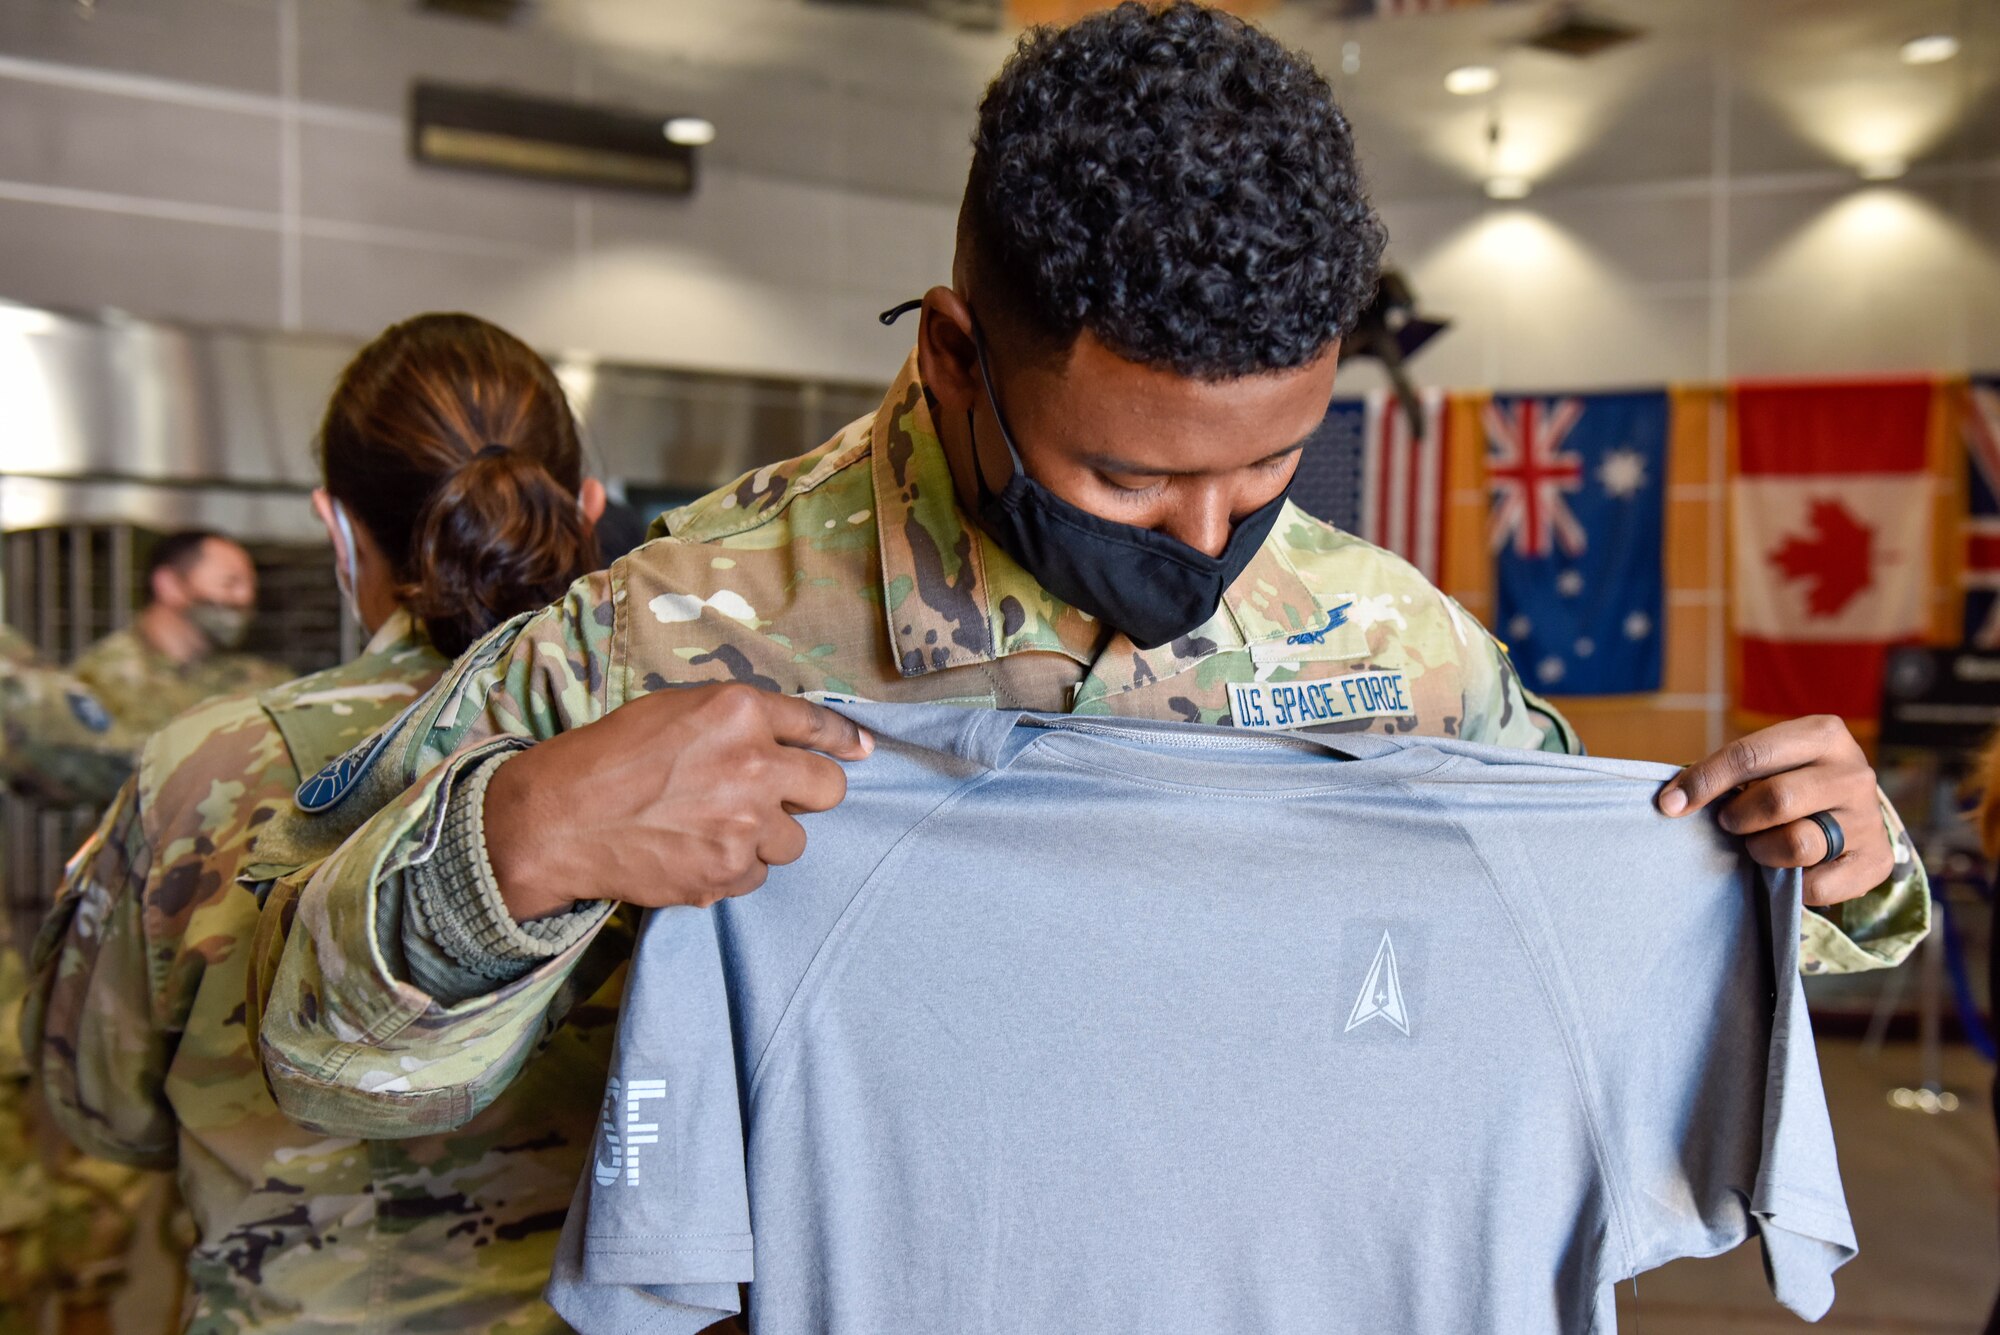 A U.S. Space Force Guardian examines the prototype for the new USSF physical training uniform on Buckley Space Force Base, Colo., Oct 20, 2021. The physical training uniform is being designed with the focus of maintaining breathability, durability, and comfort. (U.S. Space Force photo by Airman 1st Class Wyatt Stabler)